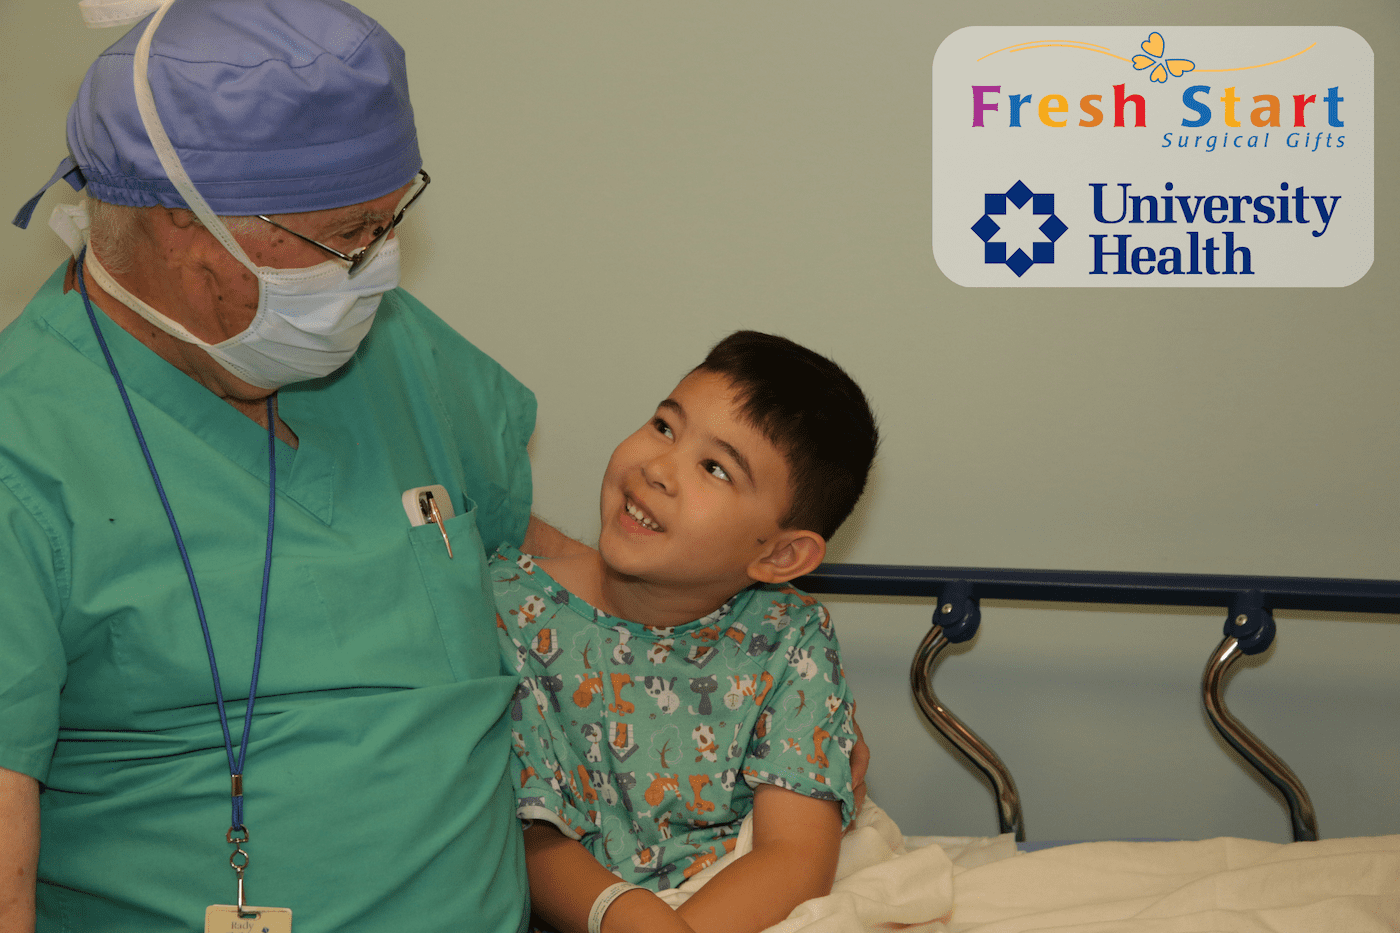 You are currently viewing Fresh Start Surgical Gifts is Now Accepting Applications to Transform Lives in San Antonio Area